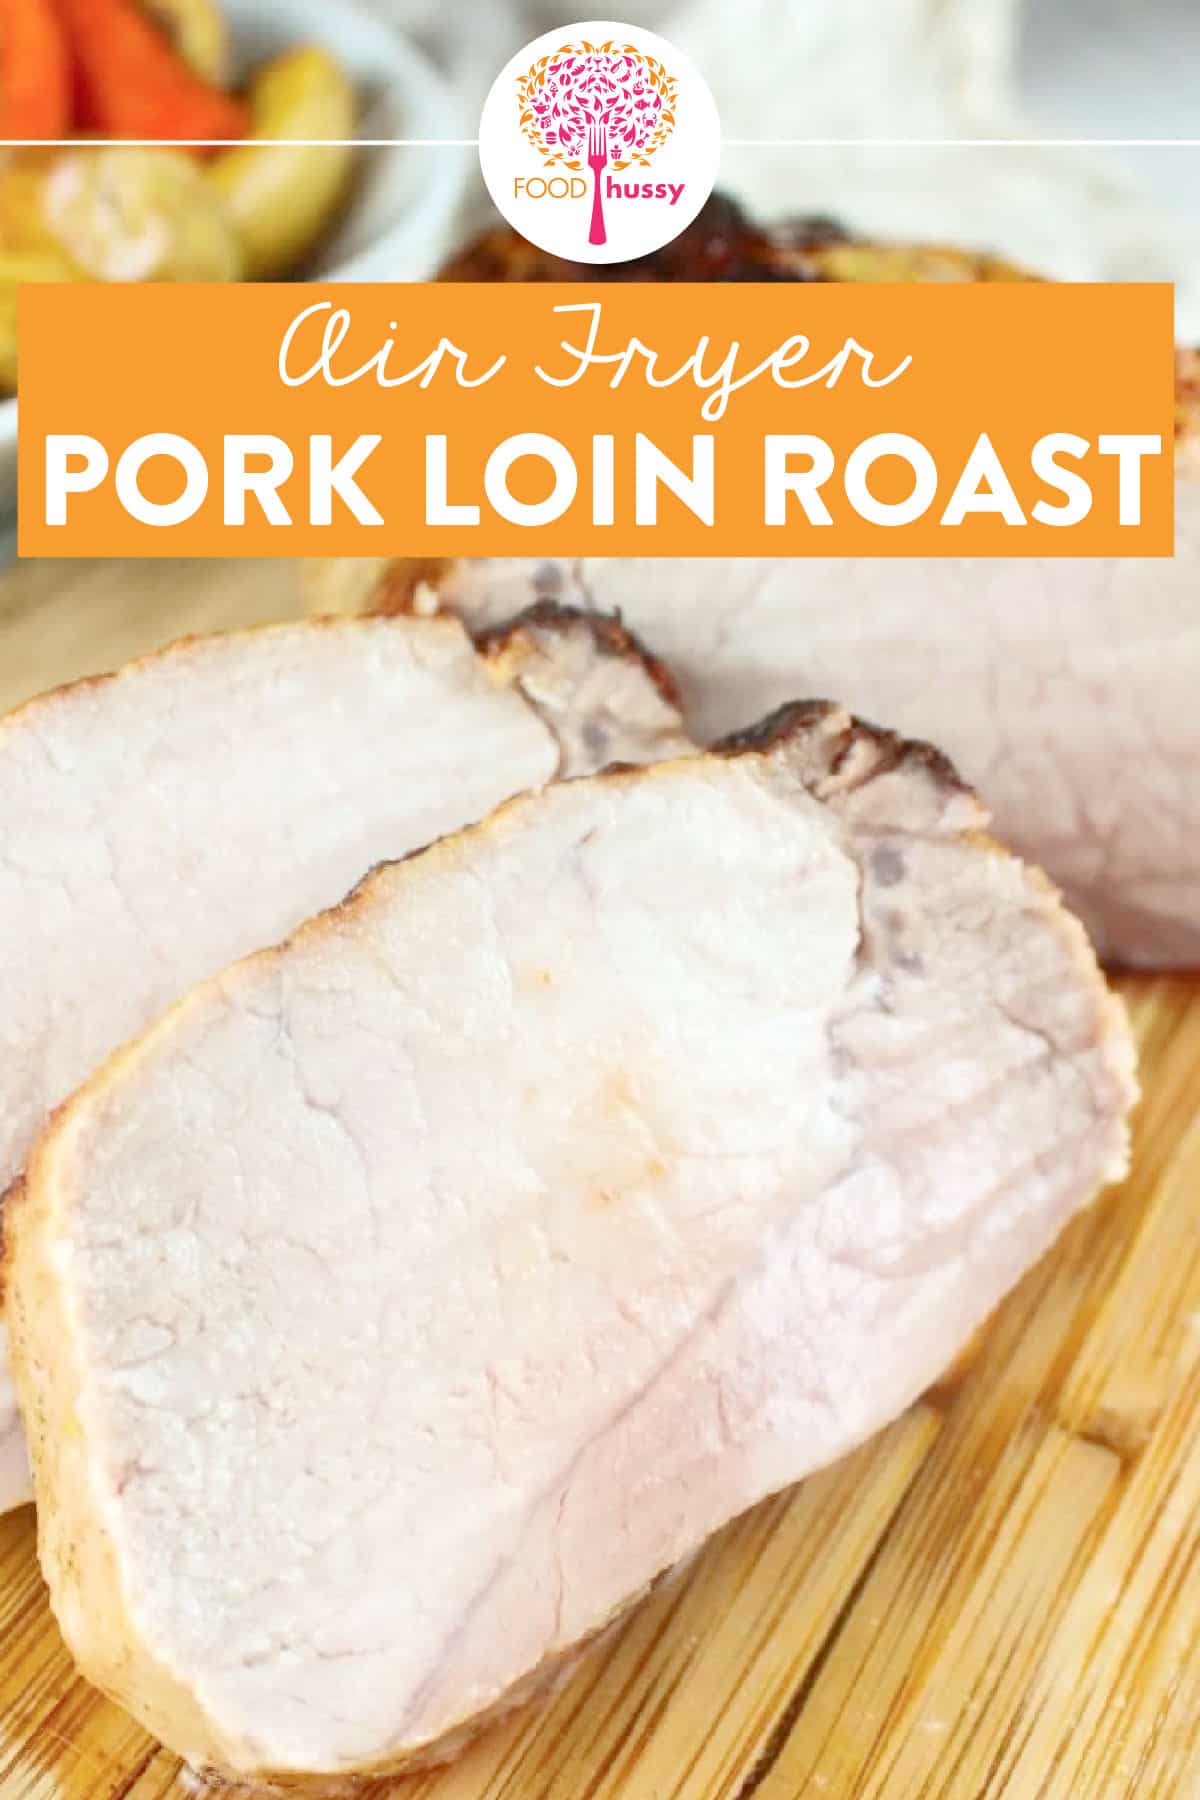 An Air Fryer Pork Loin Roast is delicious and will make some of the juiciest boneless chops you've ever eaten. It's very simple too - just marinate and air fry! Throw in some potatoes and carrots and you've got a meal for the whole family in 40 minutes.
 via @foodhussy